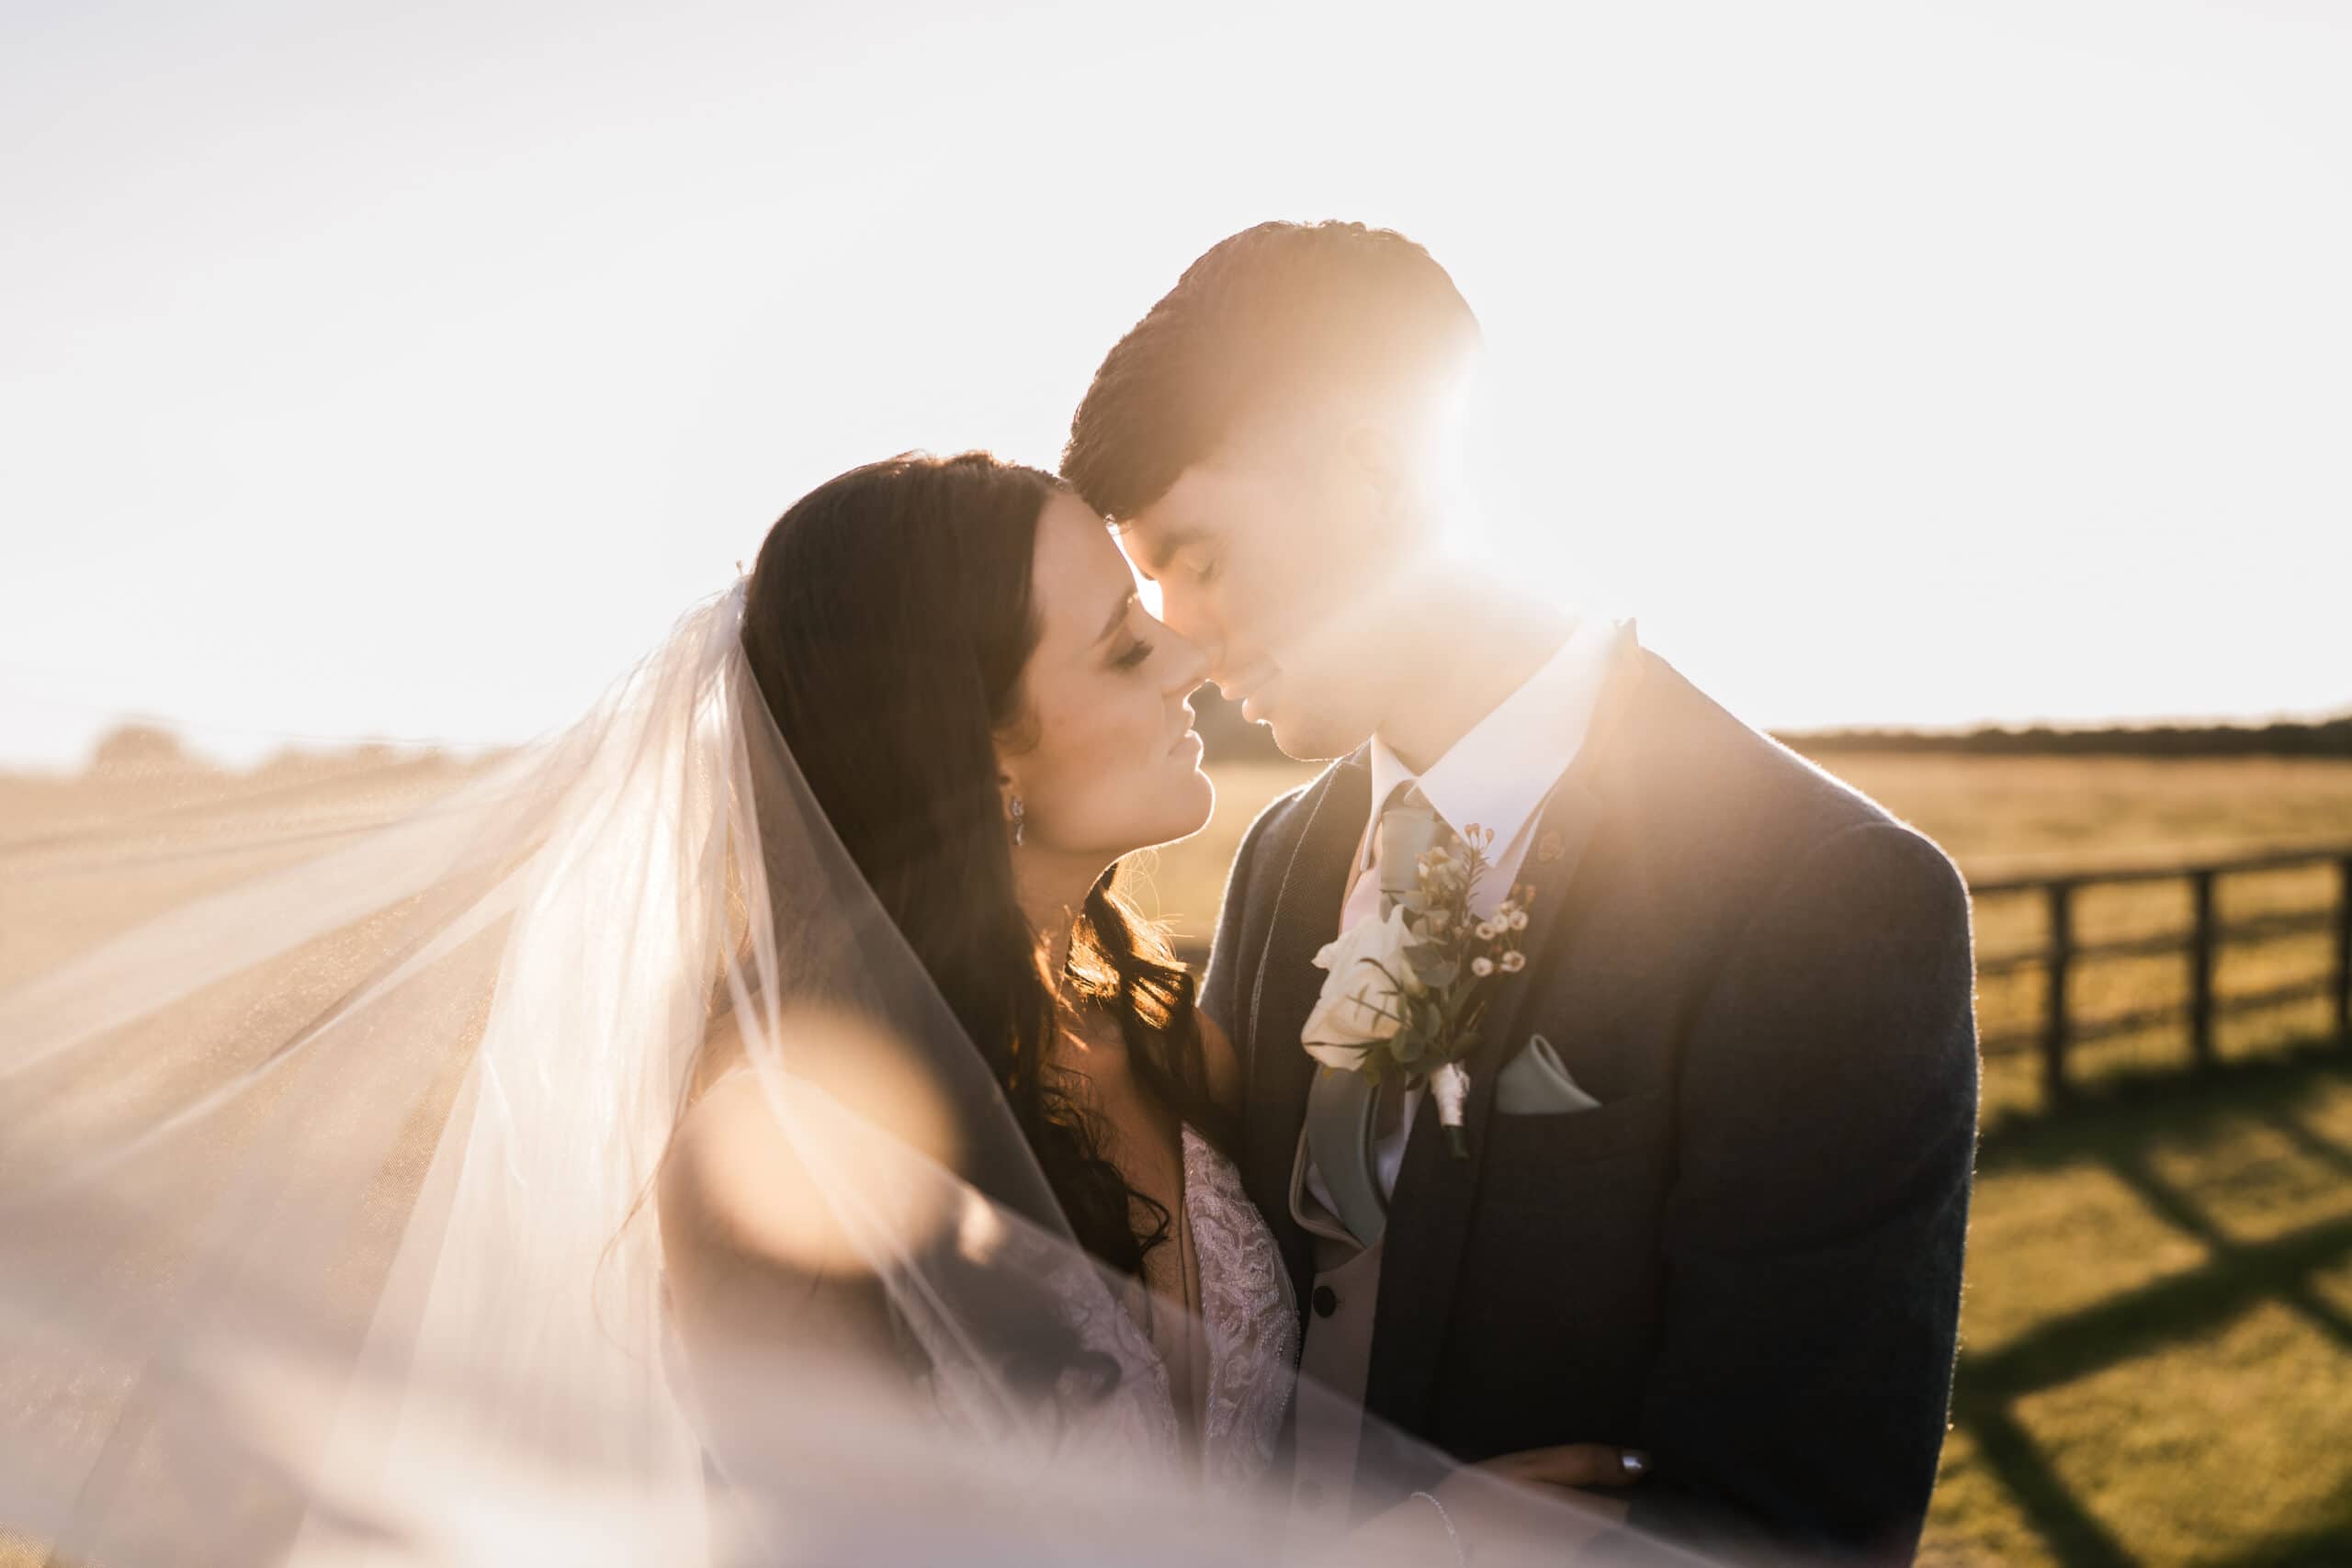 A newlywed couple sharing a romantic moment in a sunlit field, with the bride's veil and the groom's suit highlighted by the sunset.